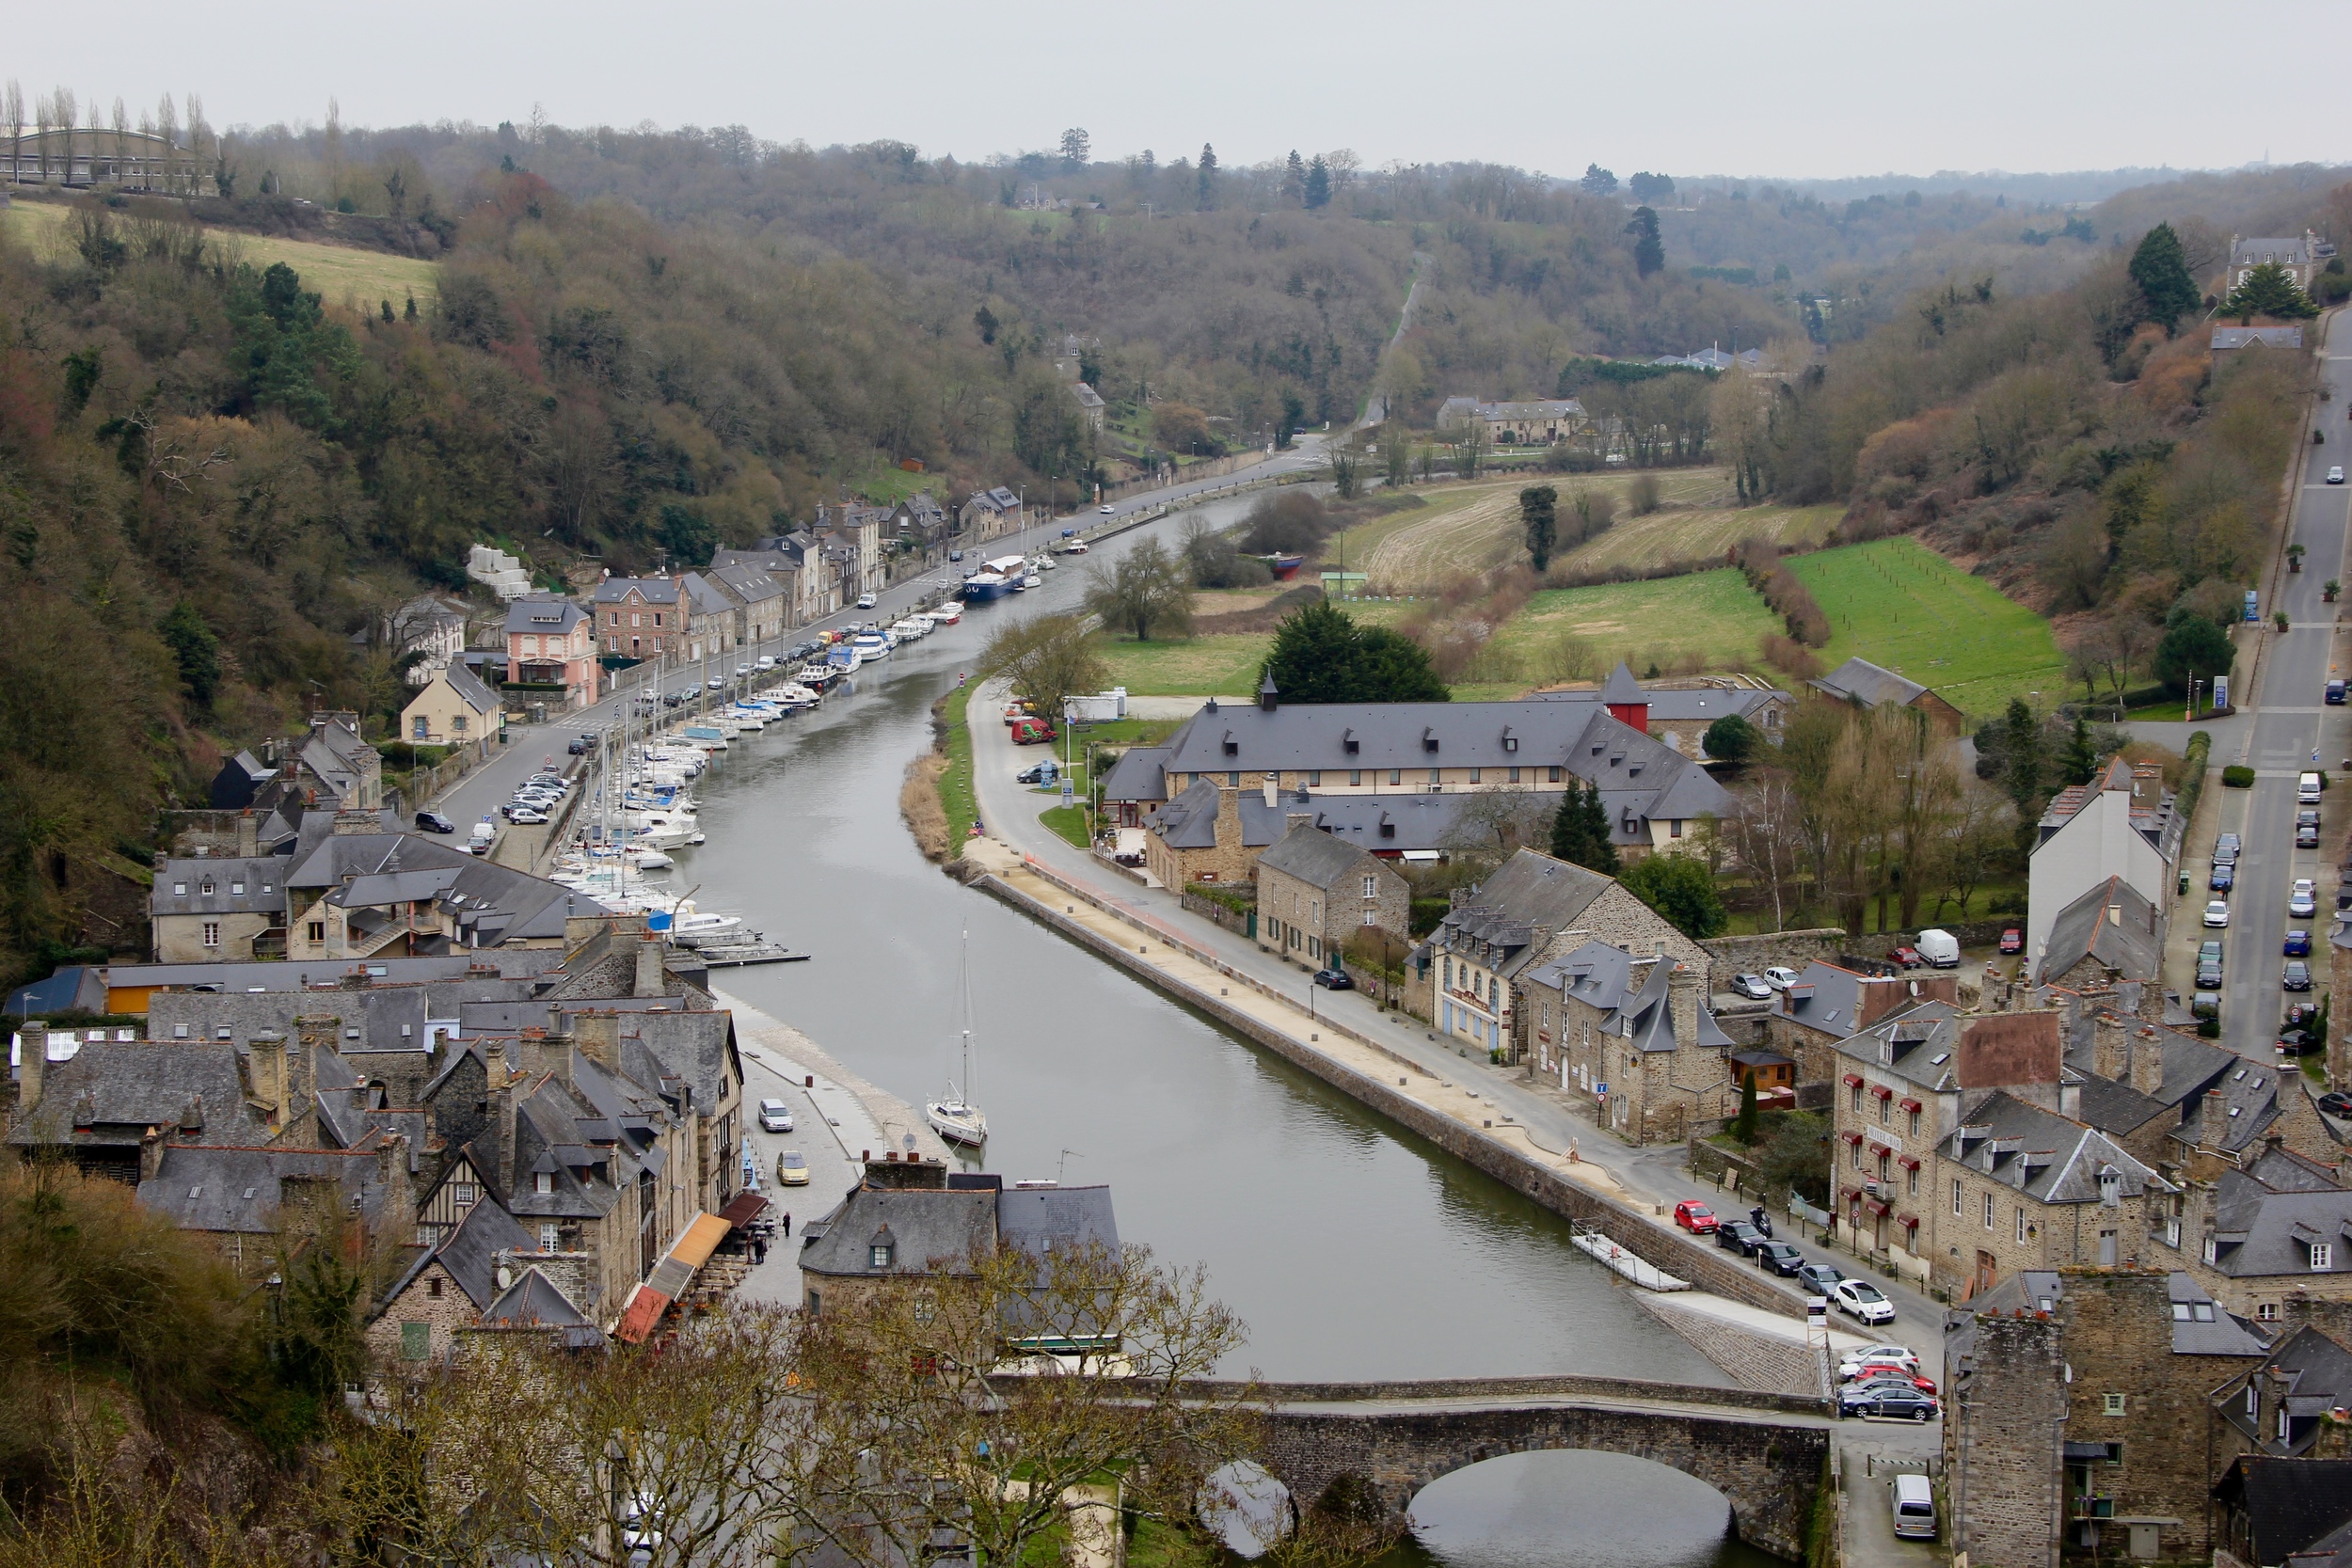 View of the River Rance from the gardens behind Dinan's basilica